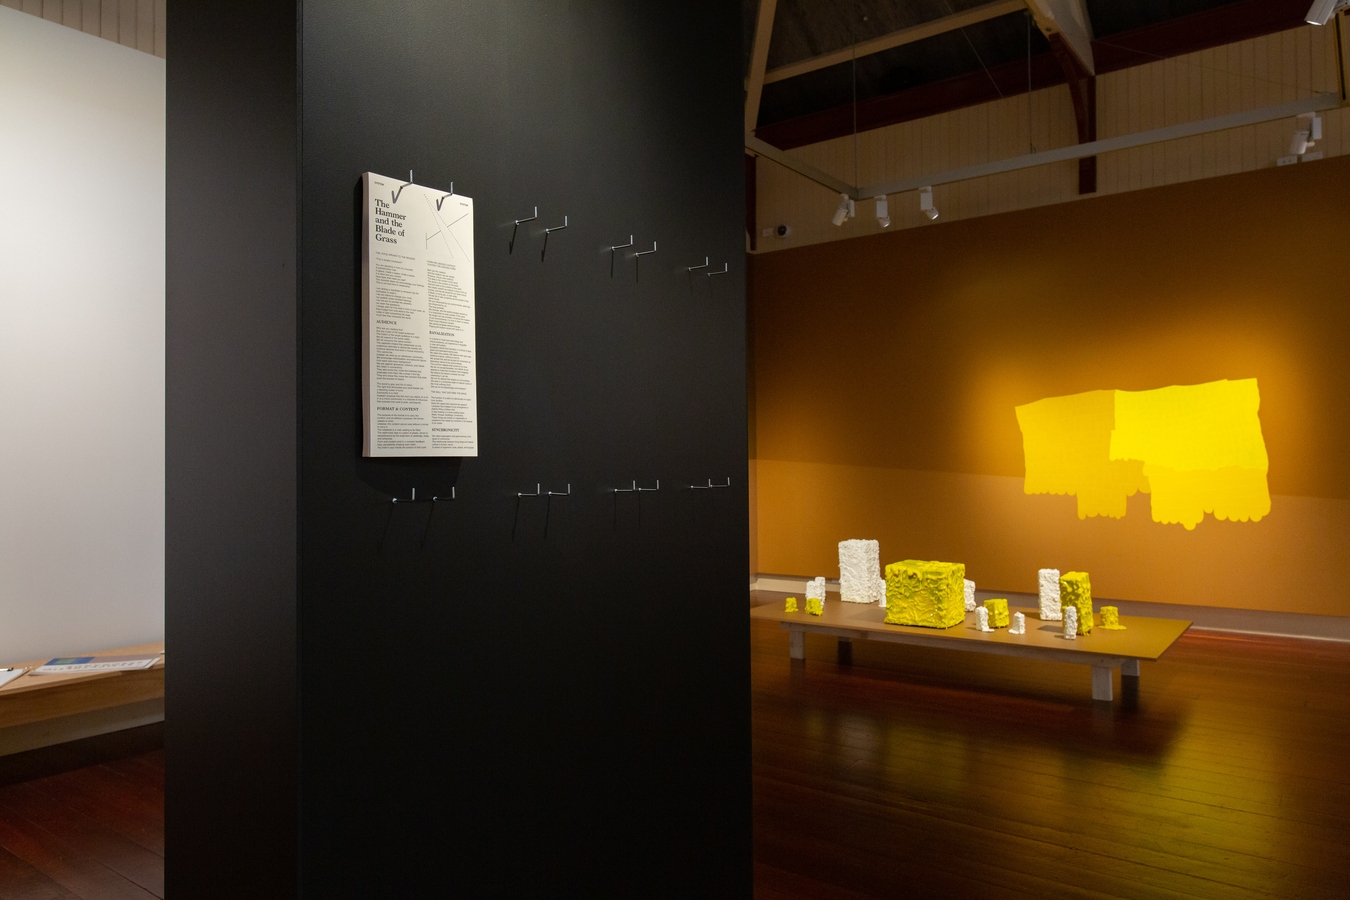 Image: Installation view of Daniel Shaskey, System to system, 2019-2020, sculpture and modular publication (left); Ruth Thomas-Edmond (right).